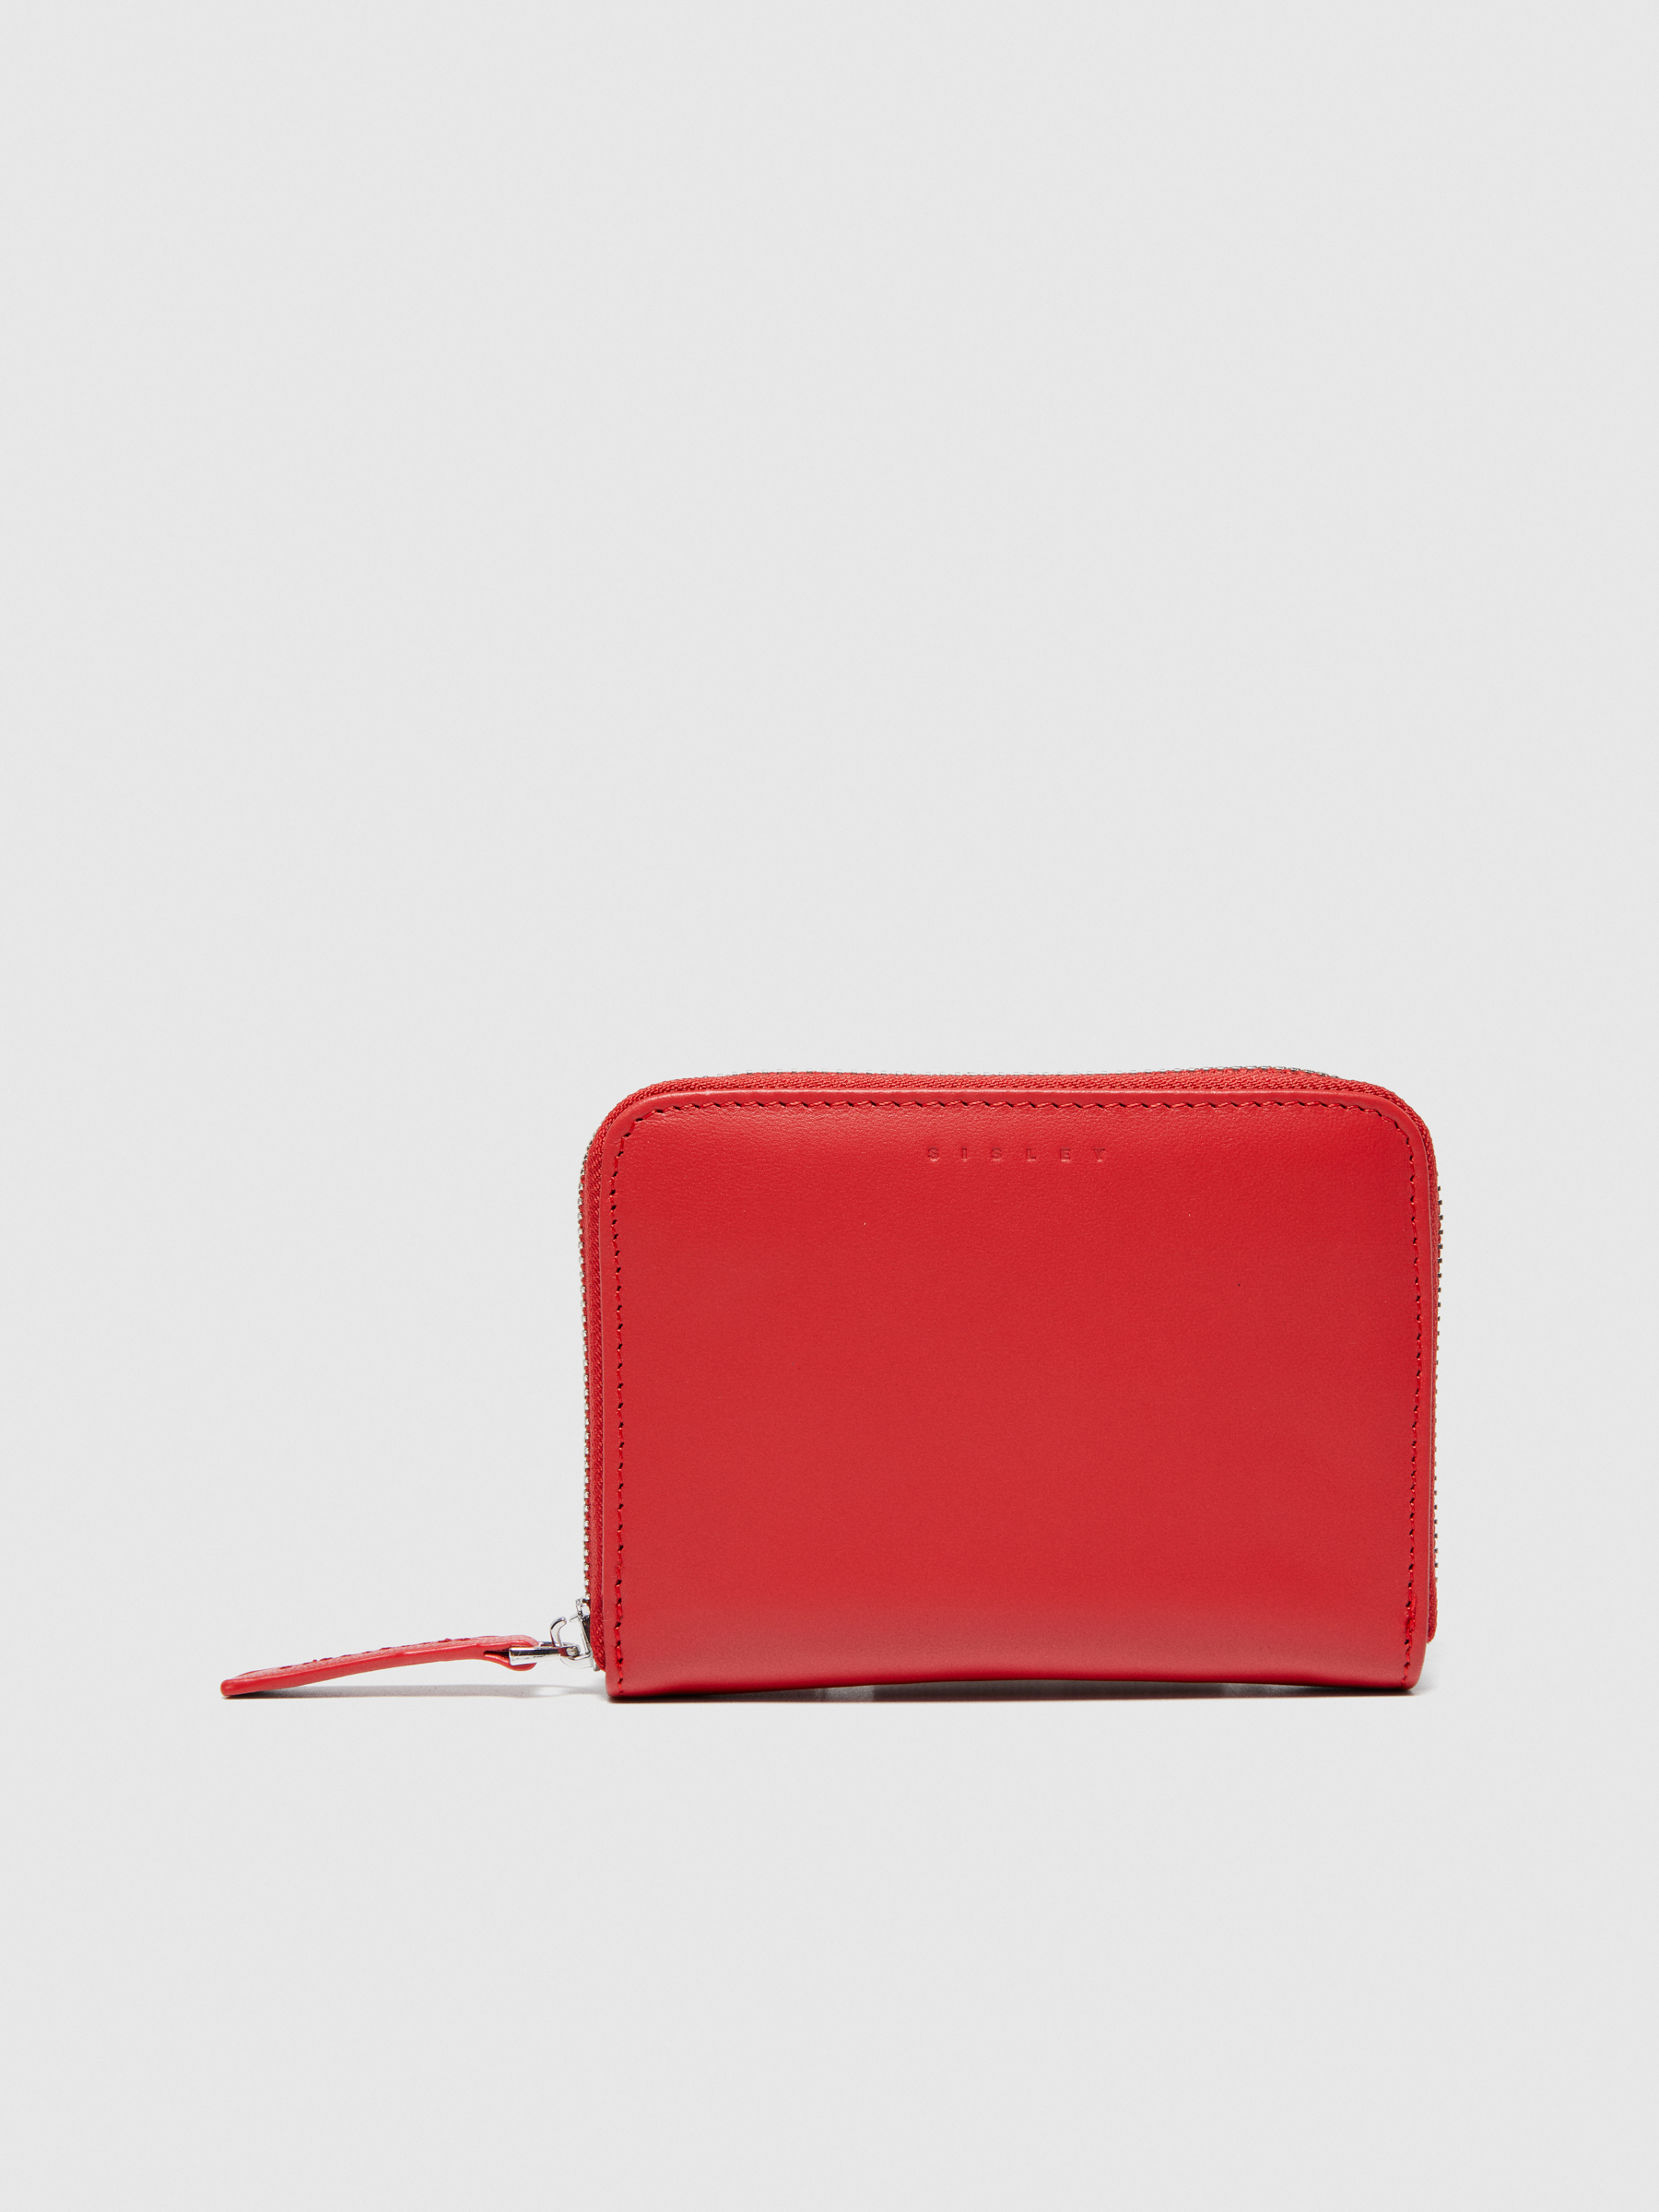 Sisley - Leather Wallet, Woman, Red, Size: ST